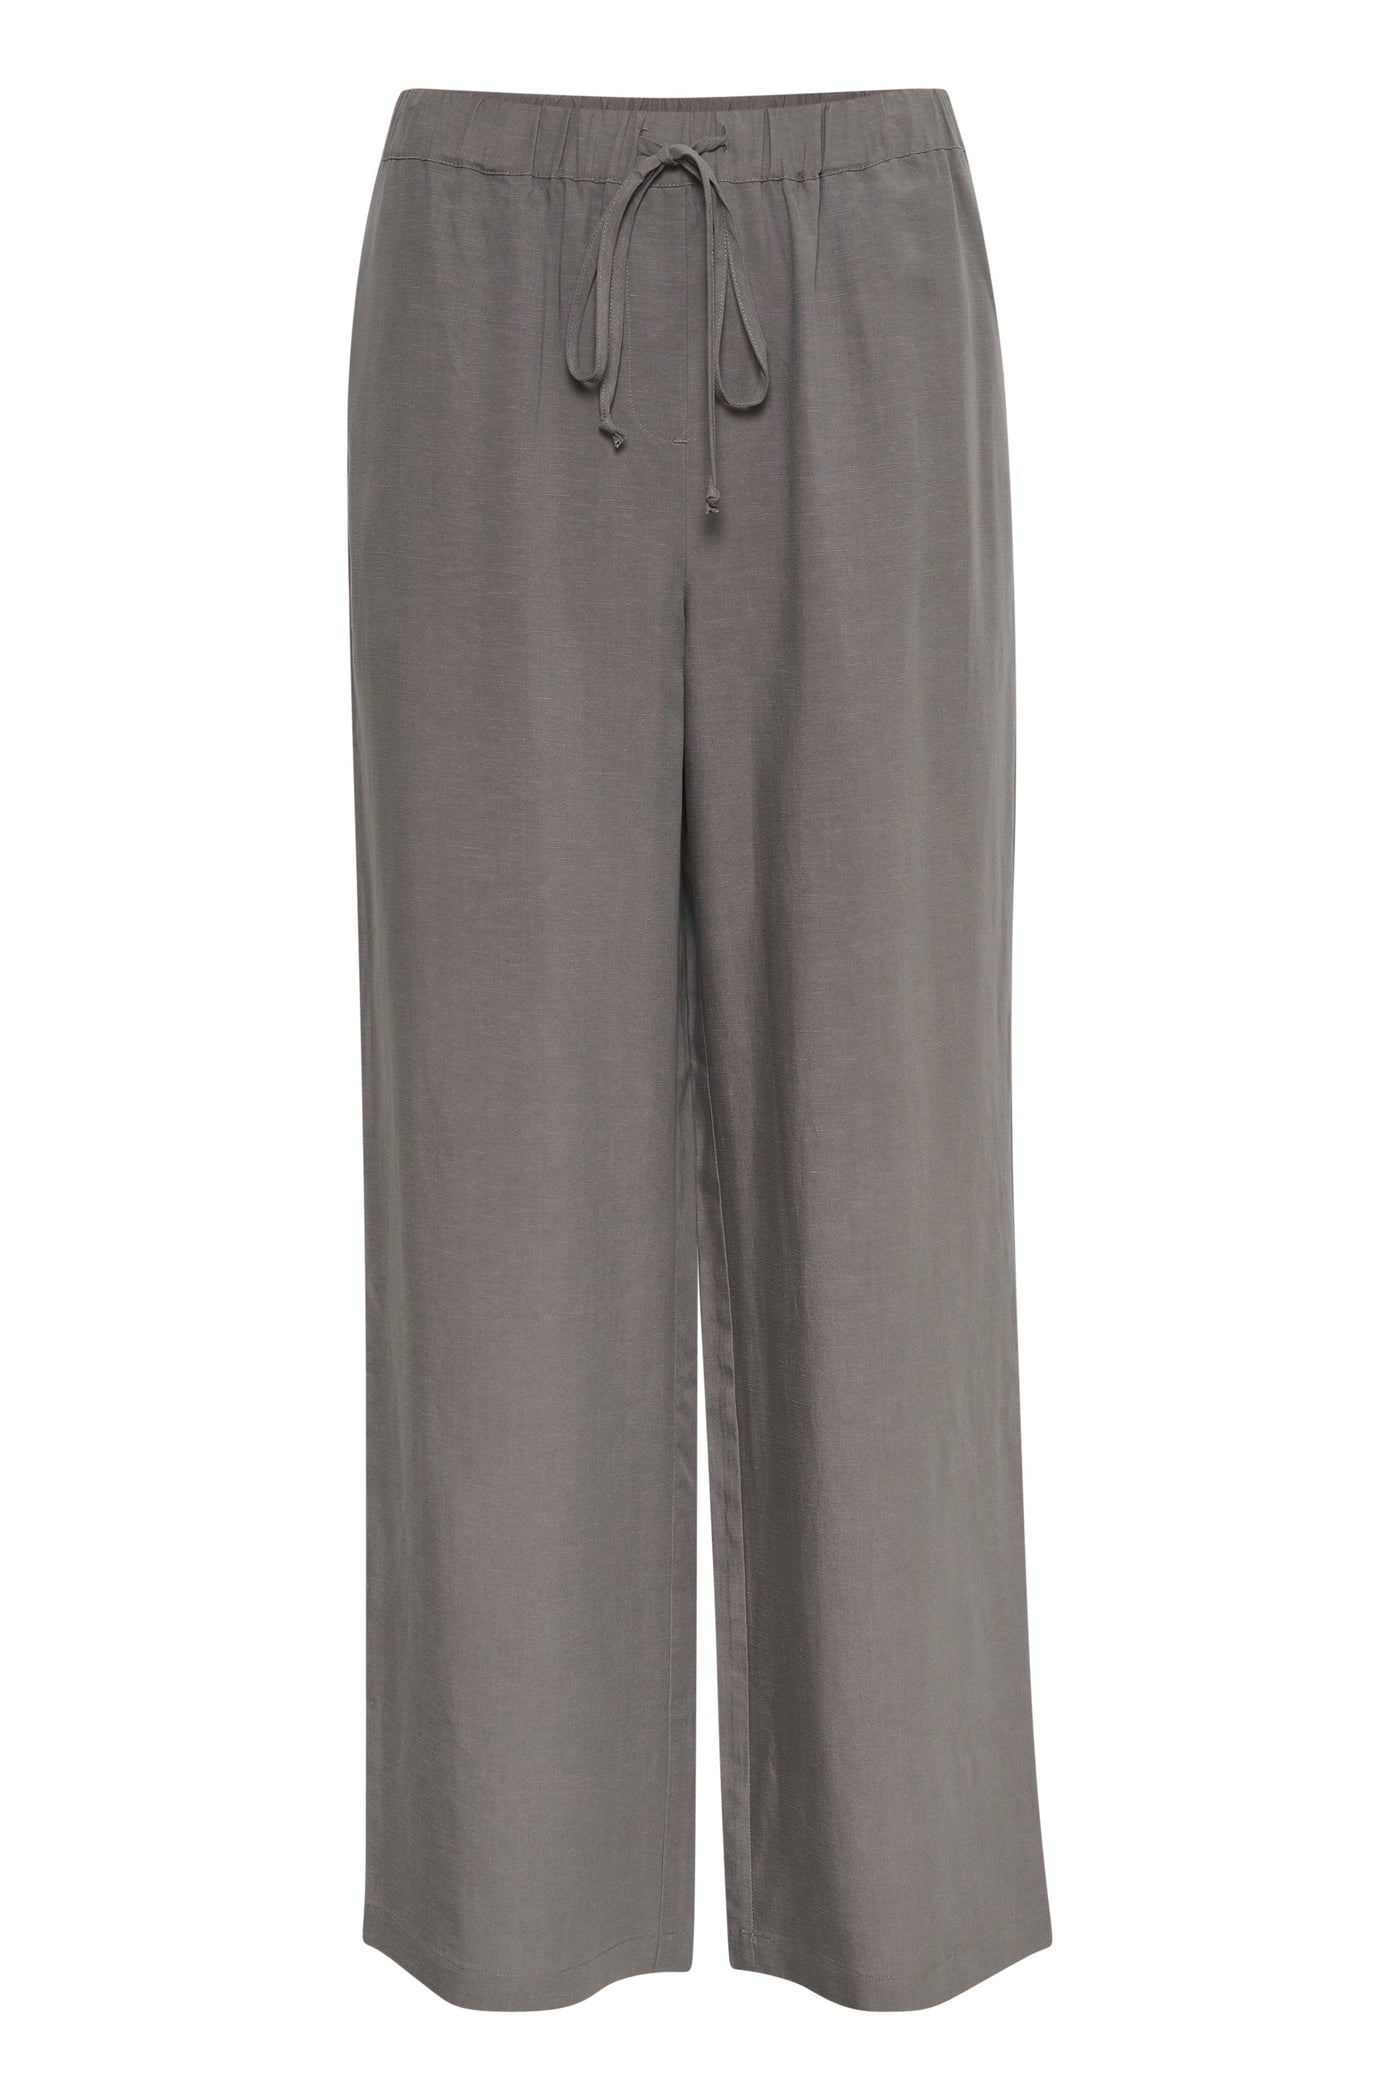 Lounge Nine AfieLN Pants-Womens-Ohh! By Gum - Shop Sustainable